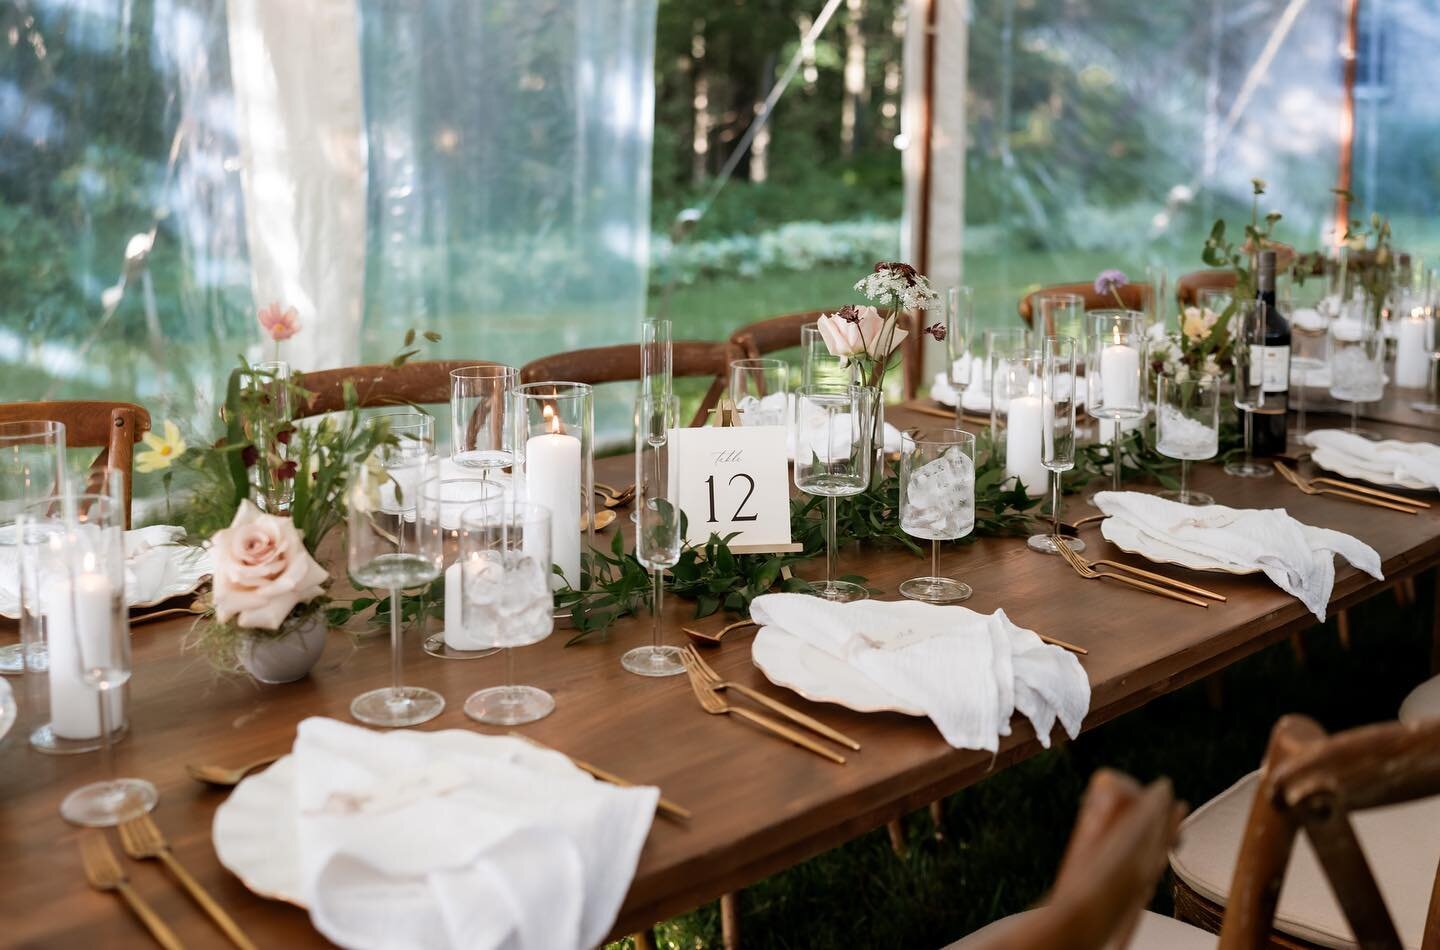 On a lovely little property @sequel.ca L &amp; E married. 

They wanted a timeless day curated with thoughtful hints of romance while honouring nature. I worked with this couple to design their day and it was so much fun to be on the wedding planning